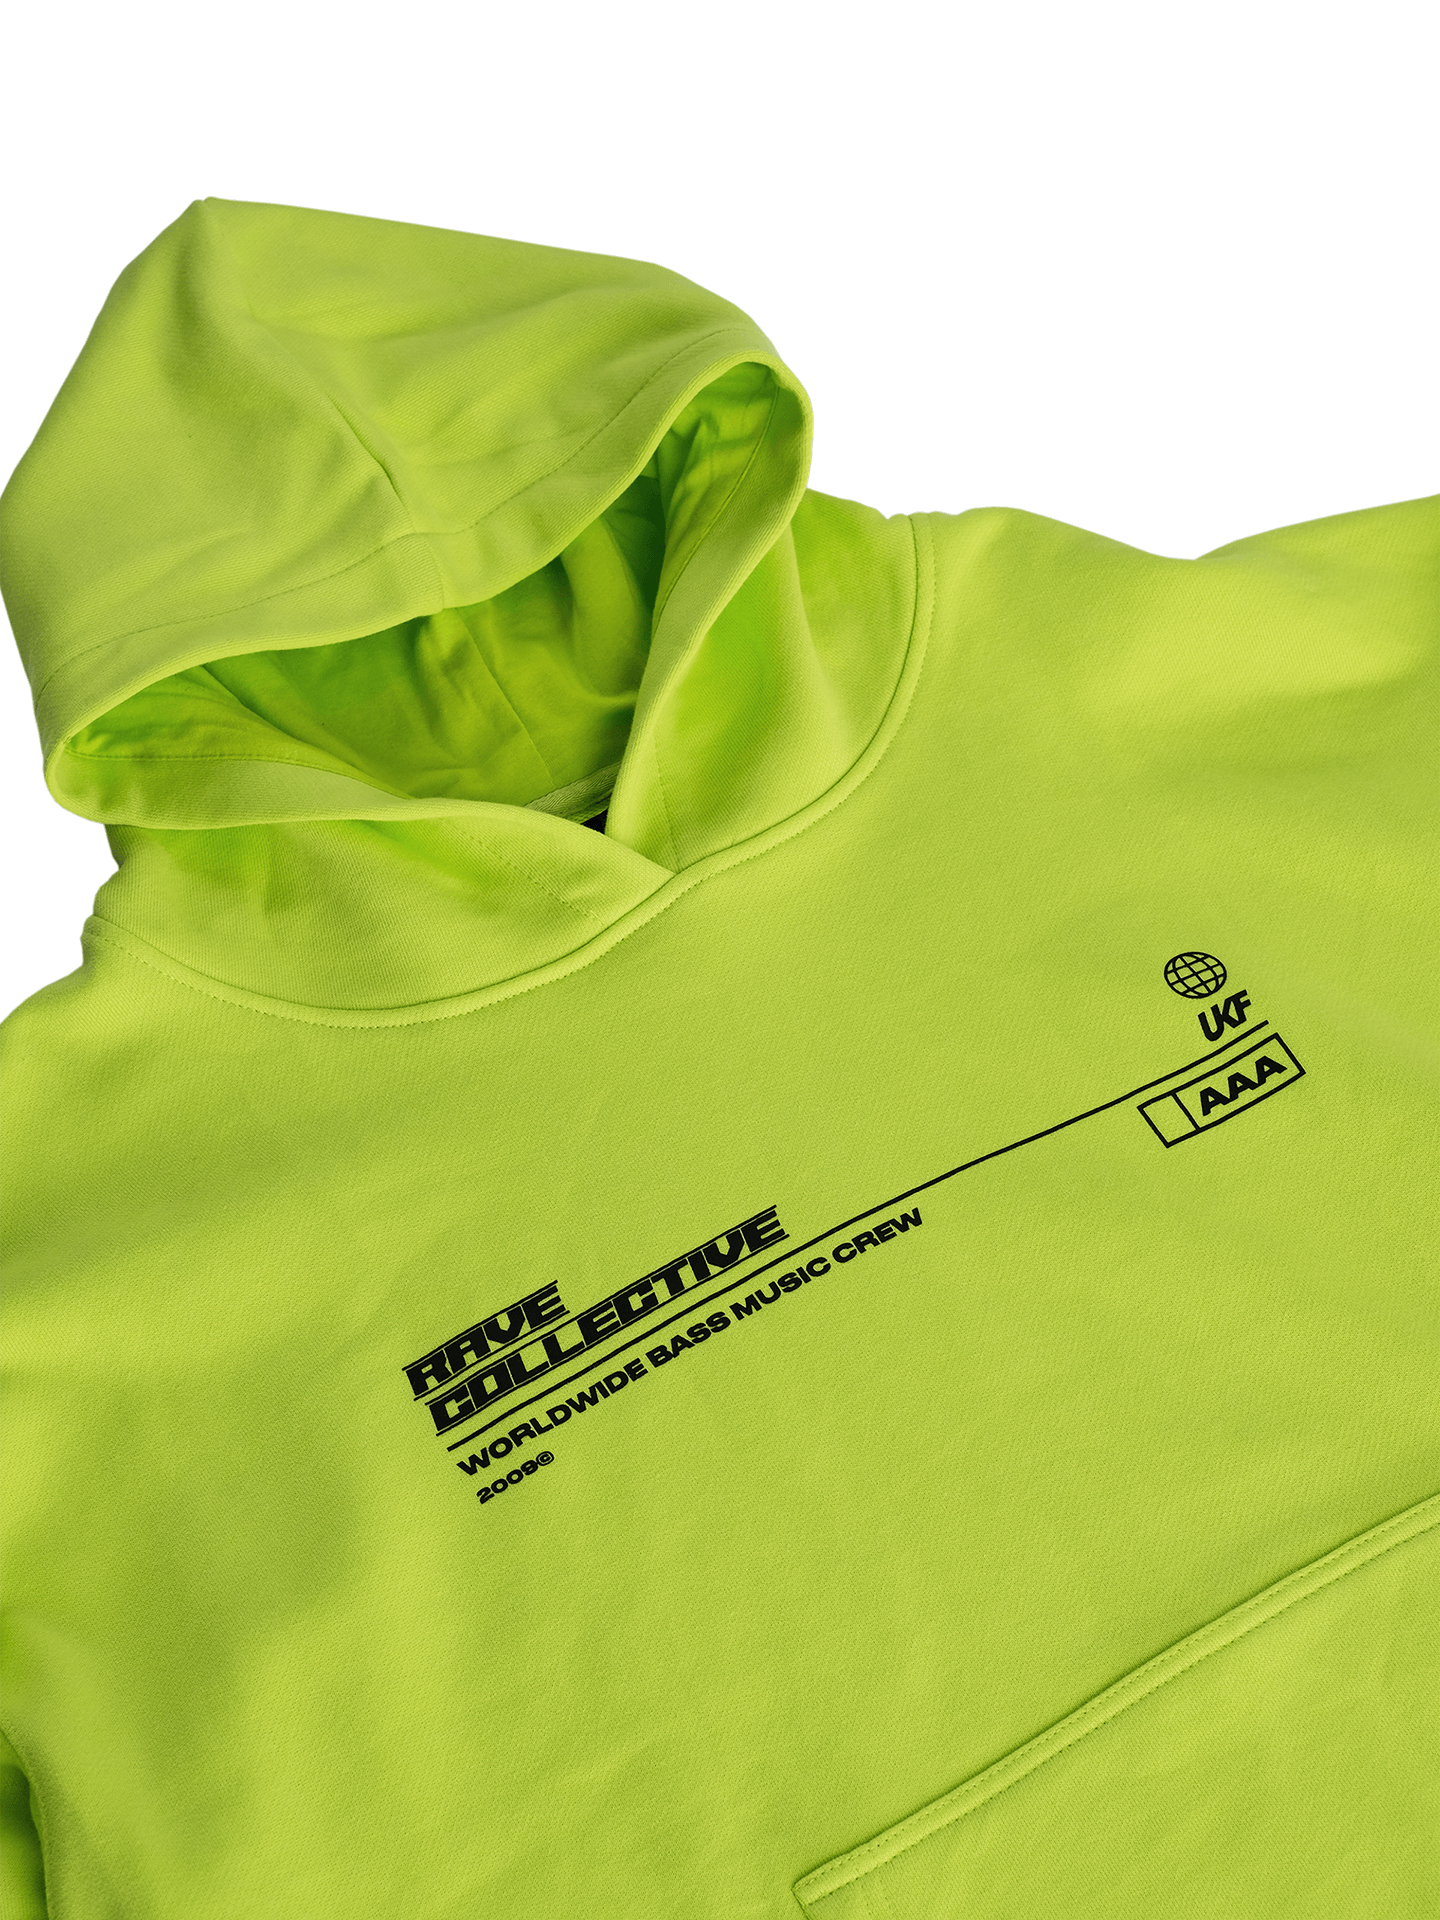 Rave Collective Green Hoodie - Close up featuring black screen print across the best, with the lettering "RAVE COLLECTIVE", "WORLDWIDE BASS MUSIC CREW", "AAA Pass", "UKF", an image of an outlined globe, and the year "2009".